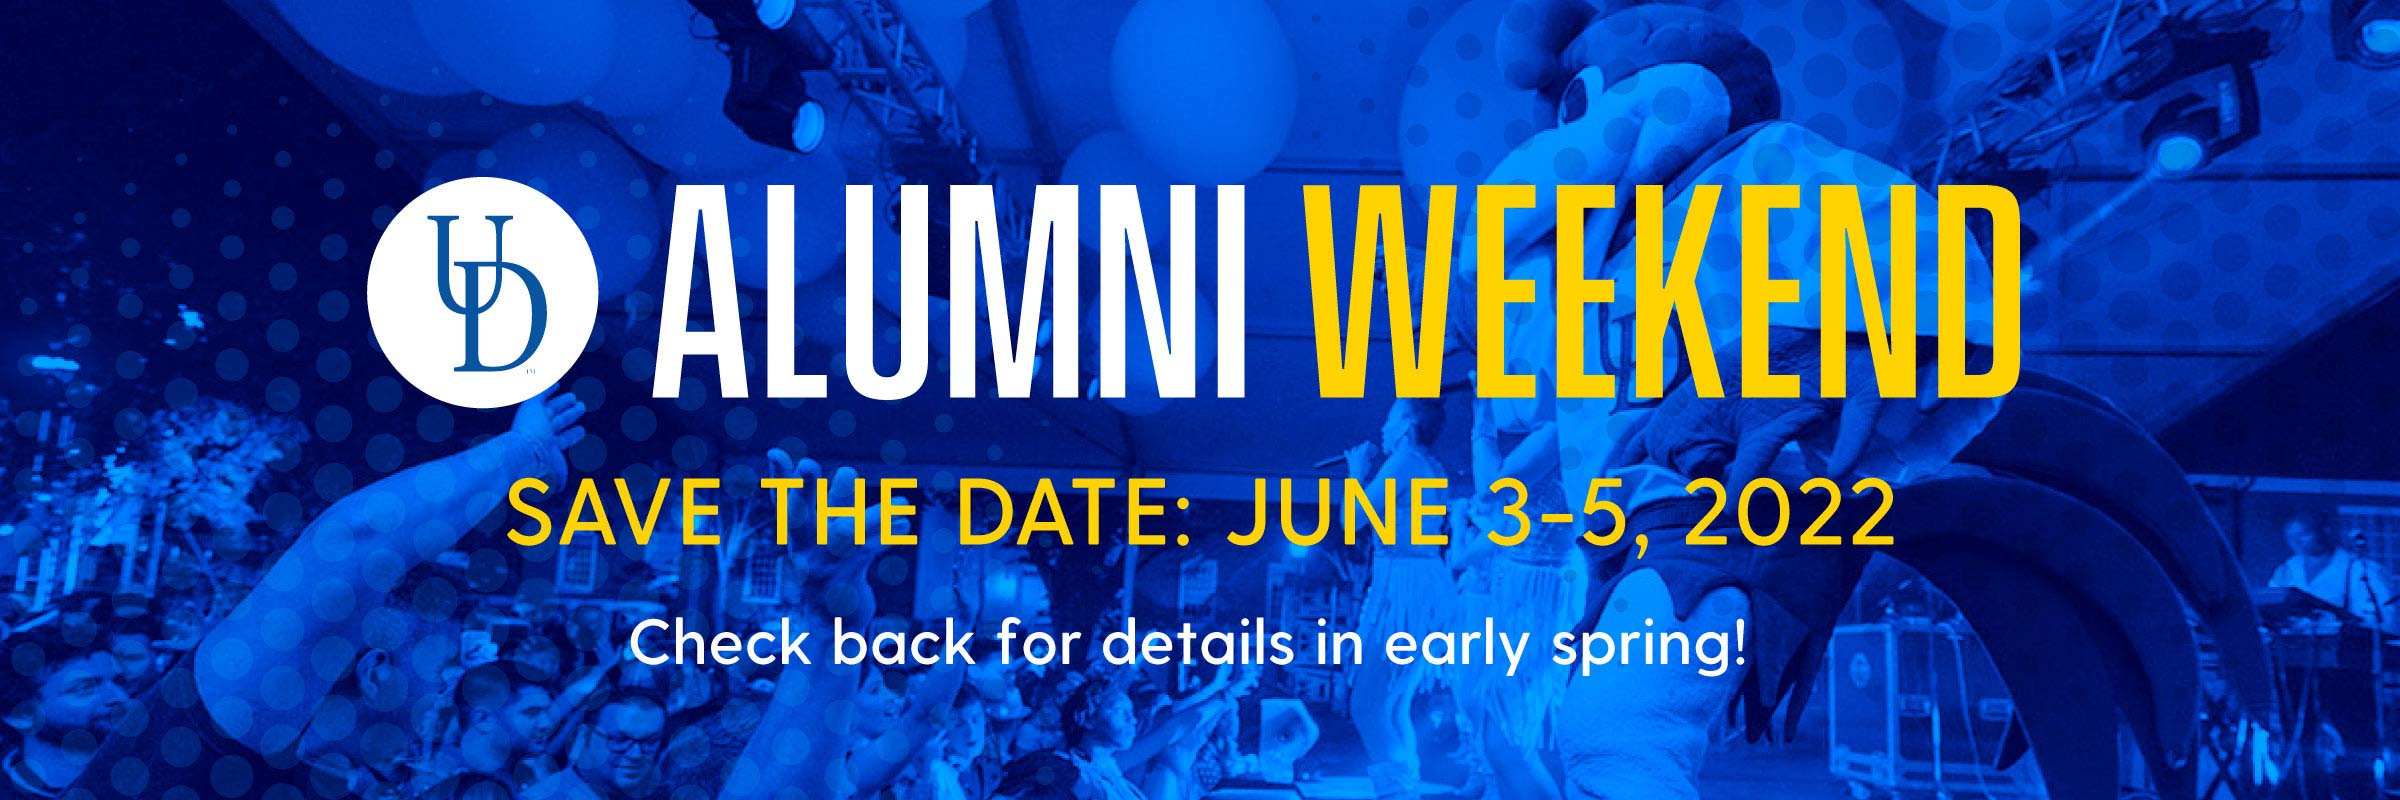 Save the date for Alumni Weekend 2022, June 3-5. Check back for details in early spring! 